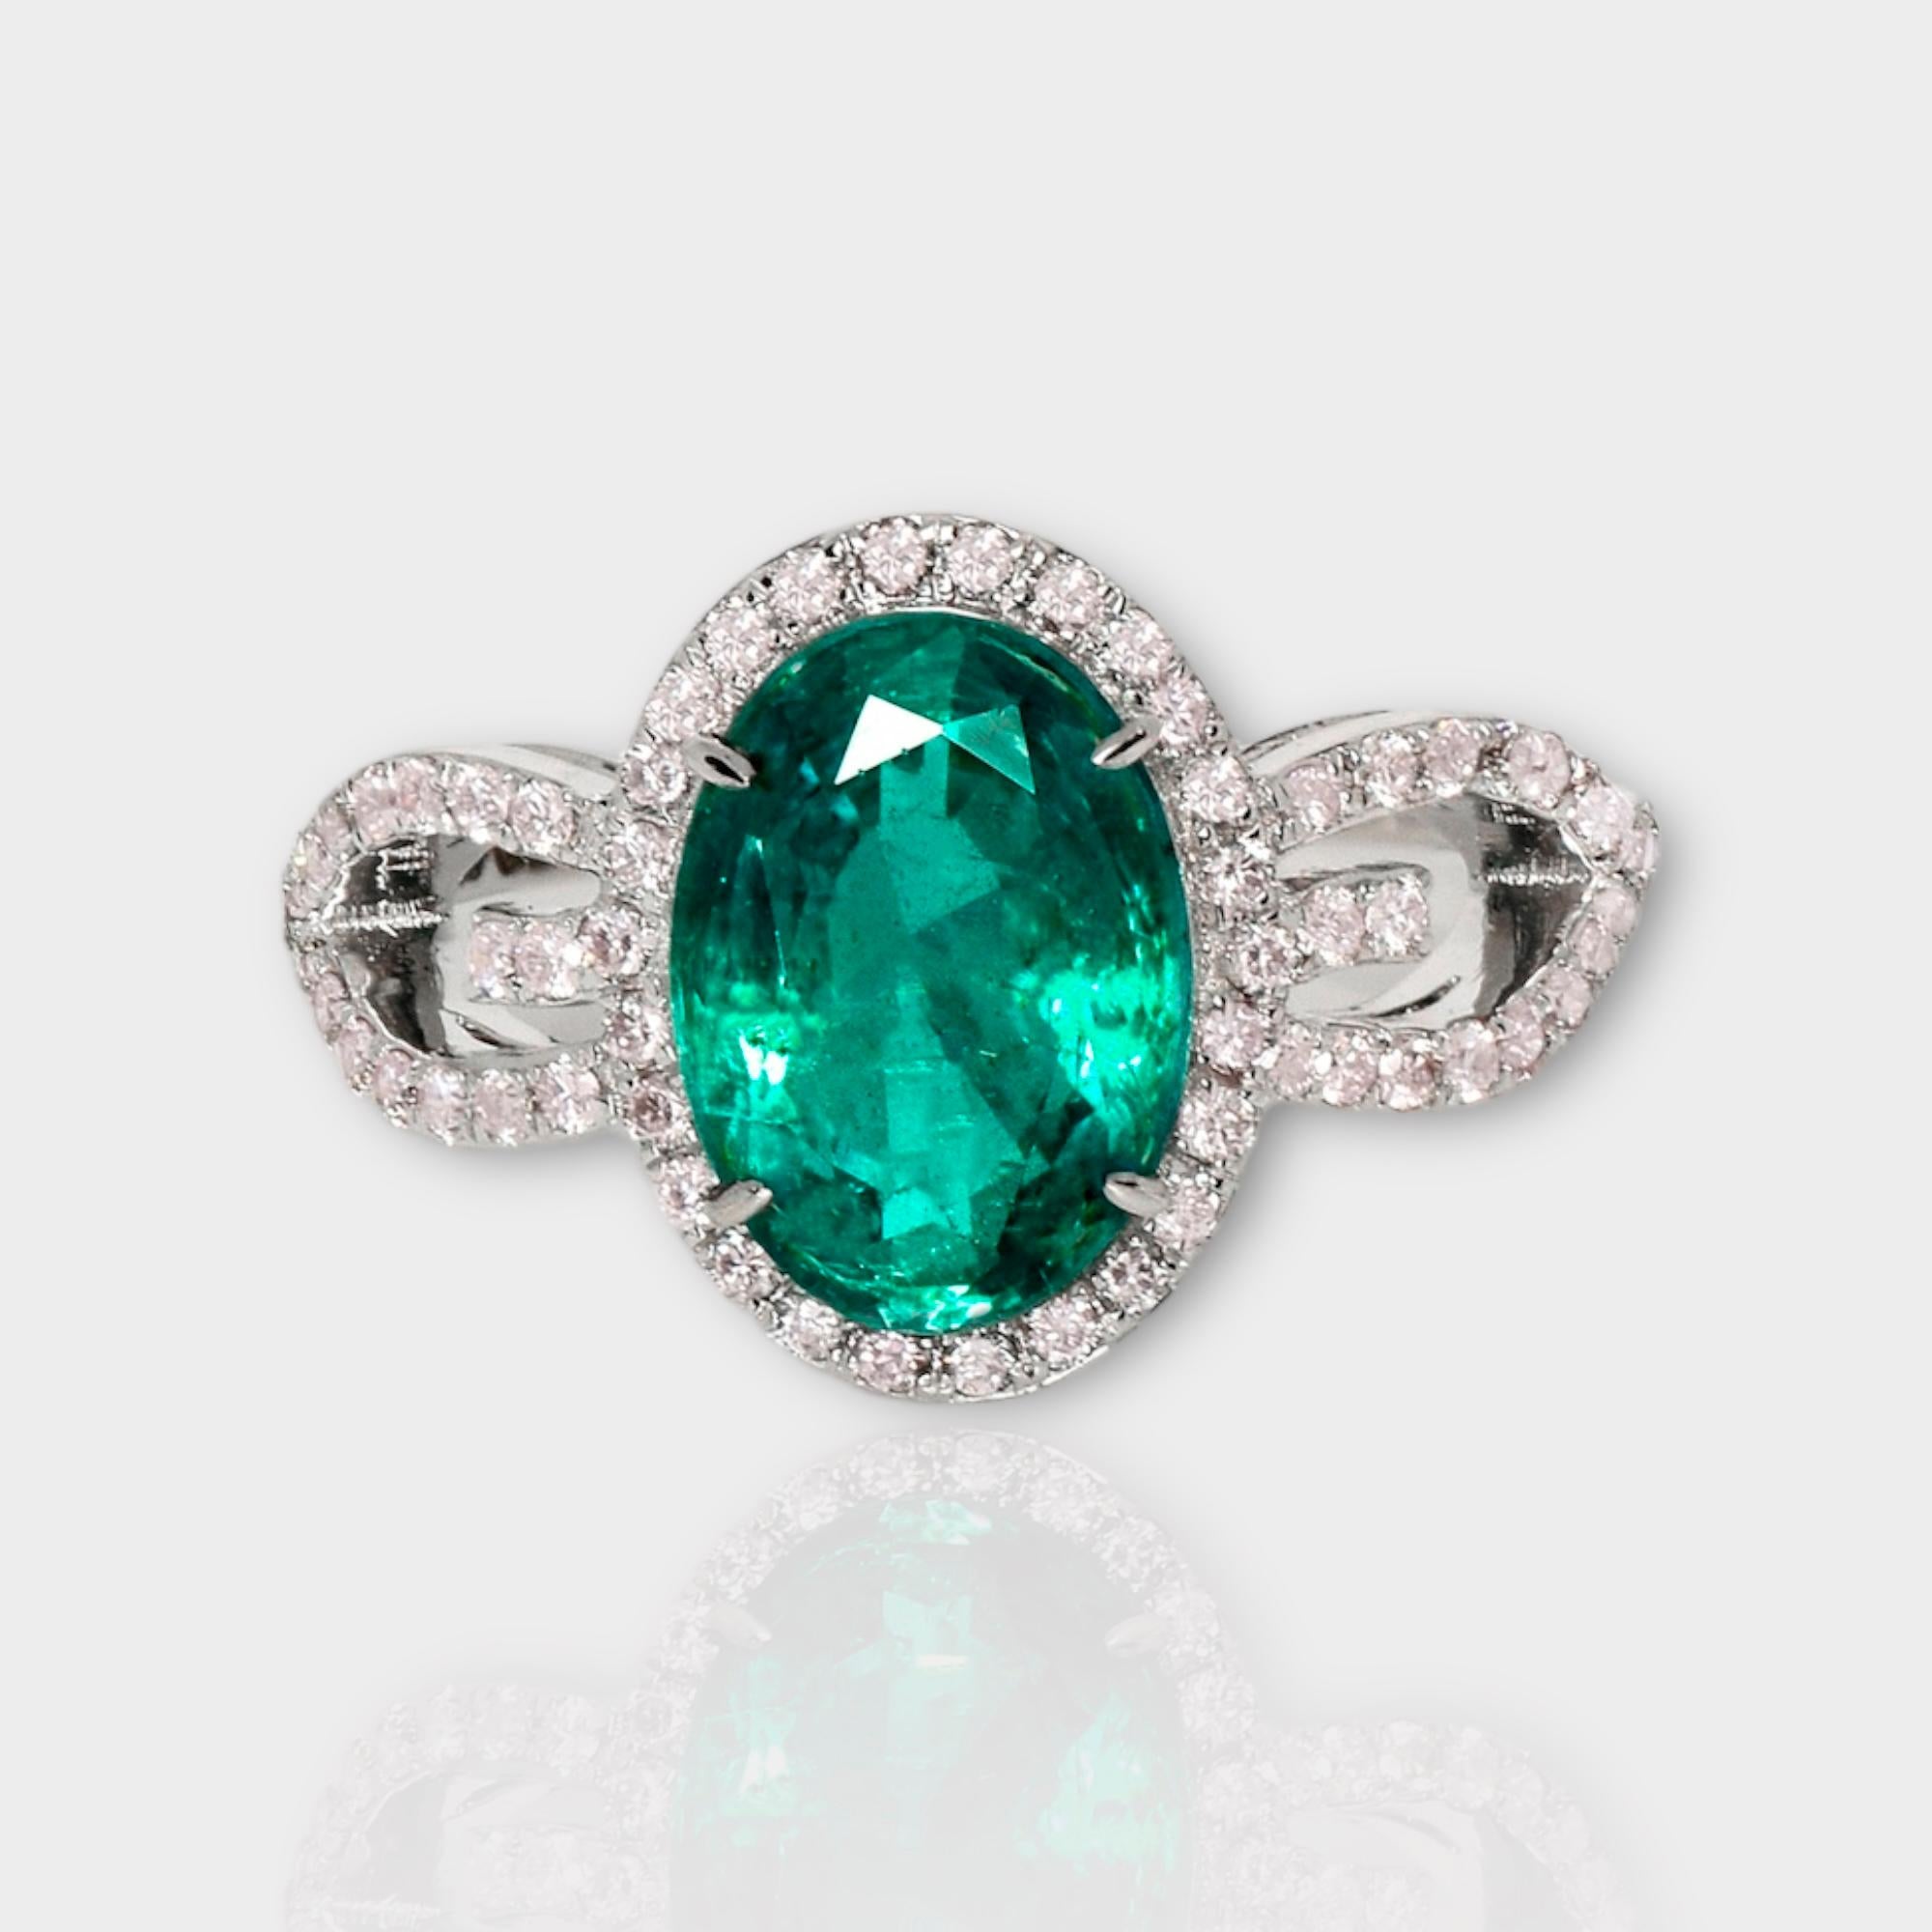 **IGI 18K White Gold 2.66 ct Emerald&Pink Diamonds Antique Art Deco Style Engagement Ring** 

An IGI-certified natural Zambia green emerald weighing 2.66 ct is set on an 18K white gold arc deco design band with natural pink diamonds weighing 0.43